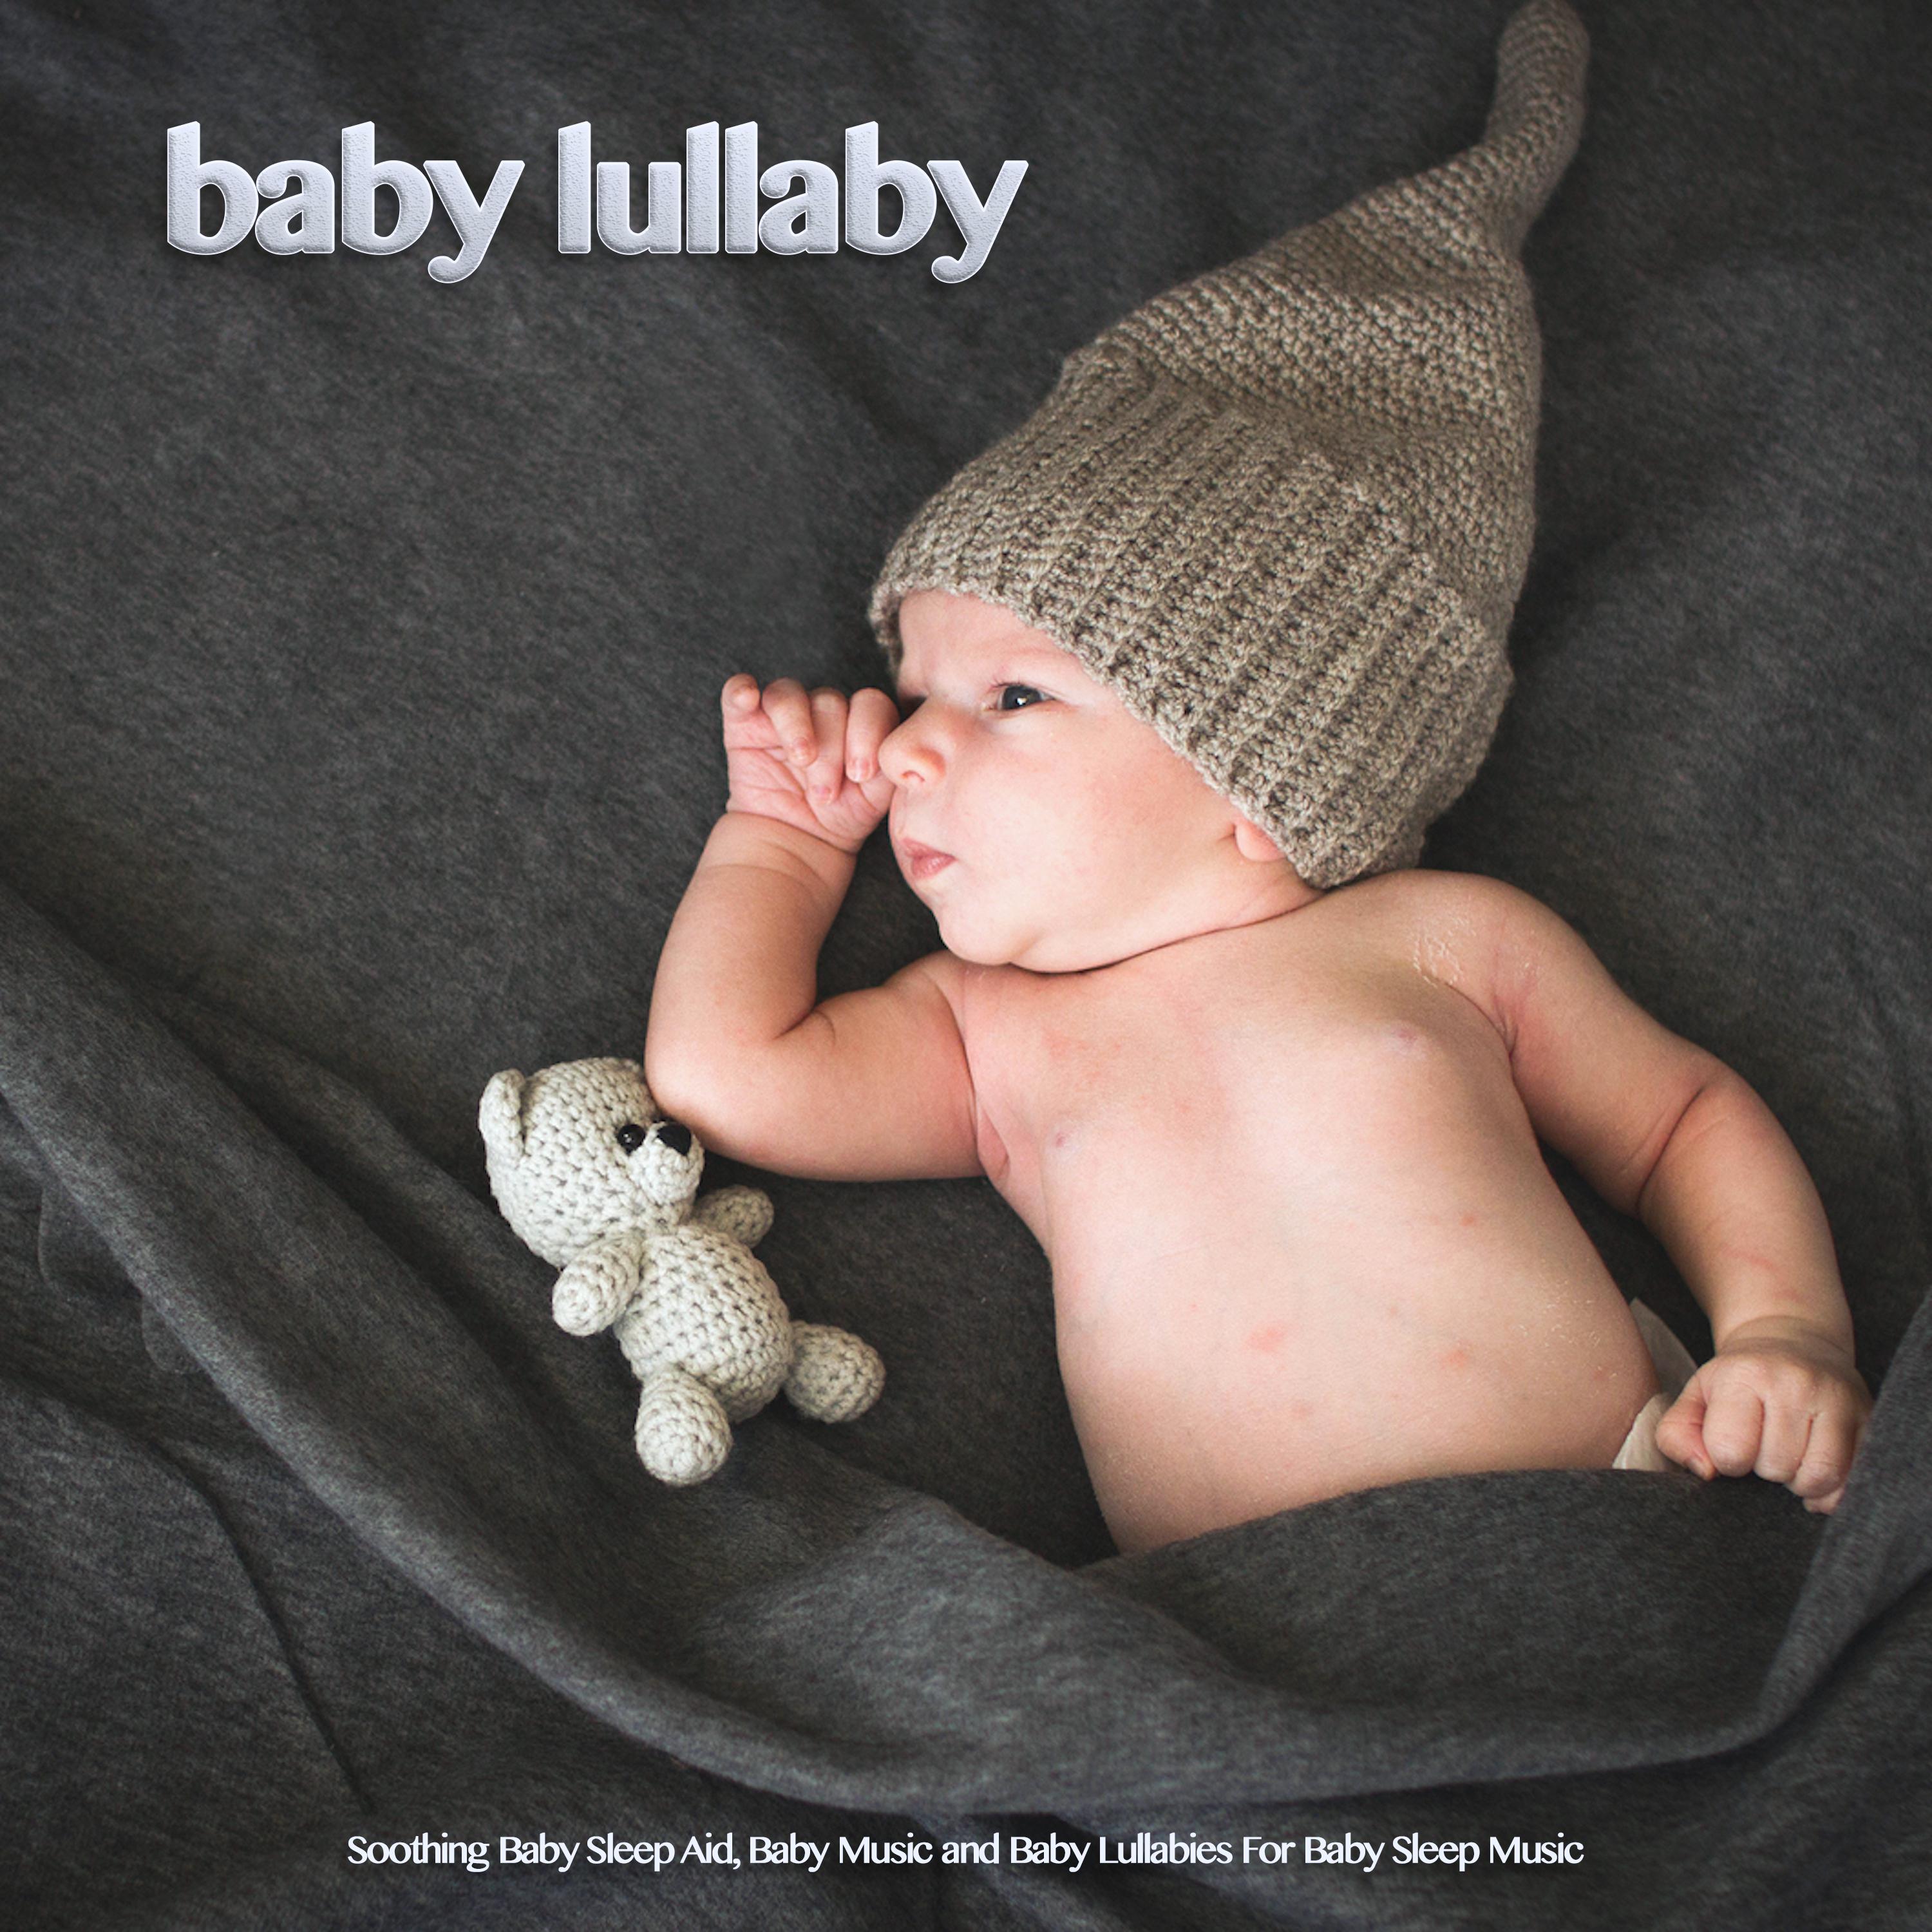 Baby Lullaby: Soothing Baby Sleep Aid, Baby Music and Baby Lullabies For Baby Sleep Music